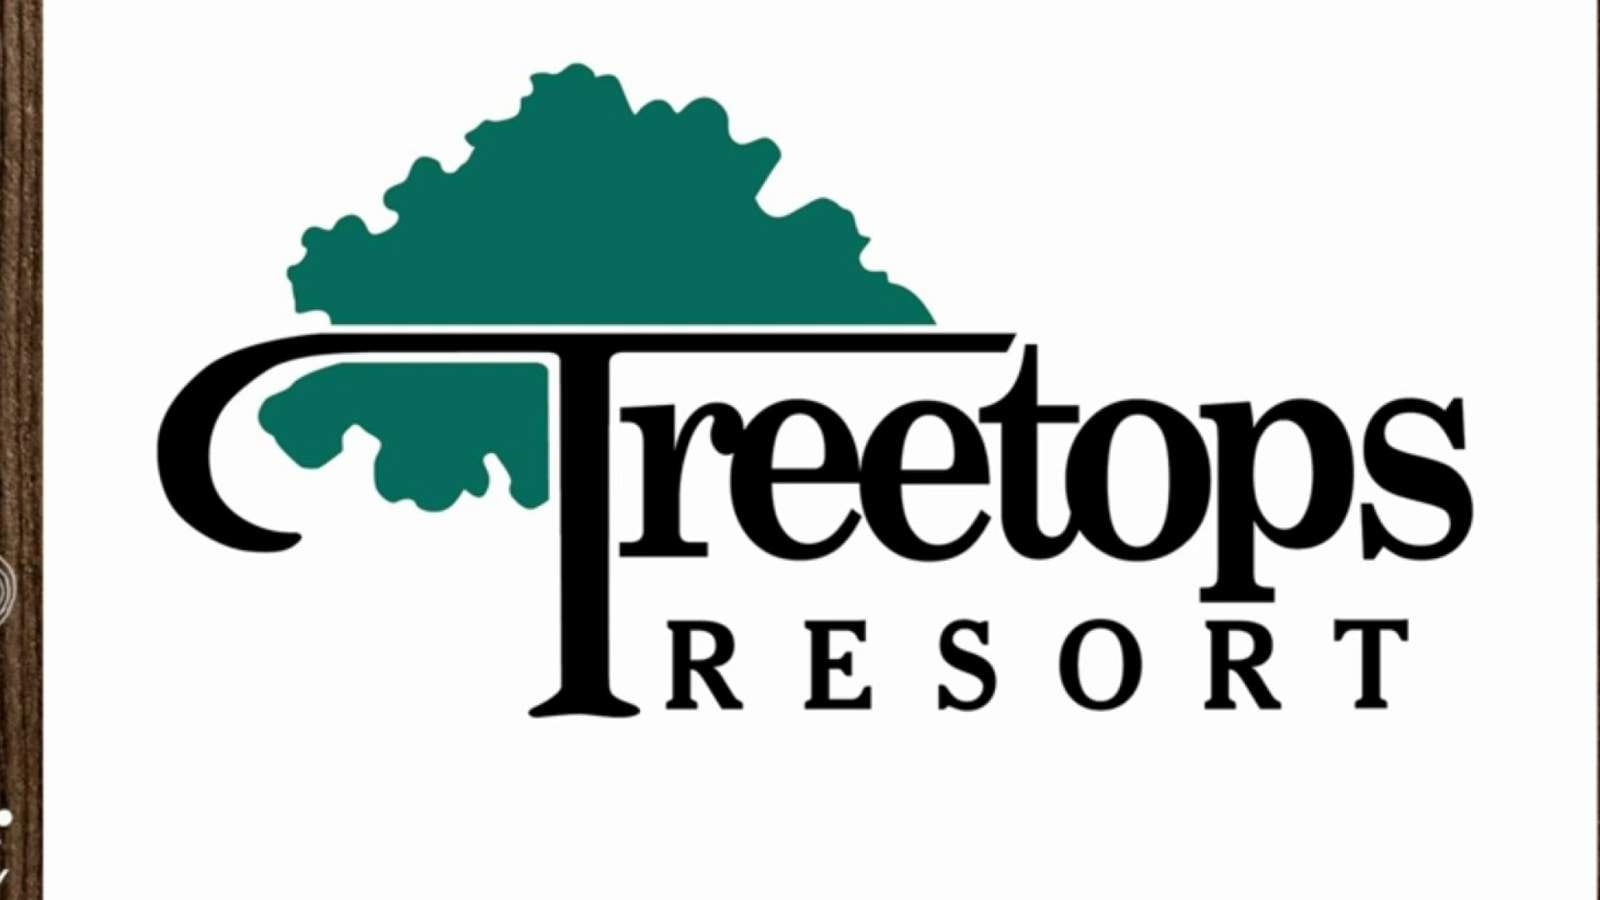 Treetops Resort has a great golfing experience for Dad!